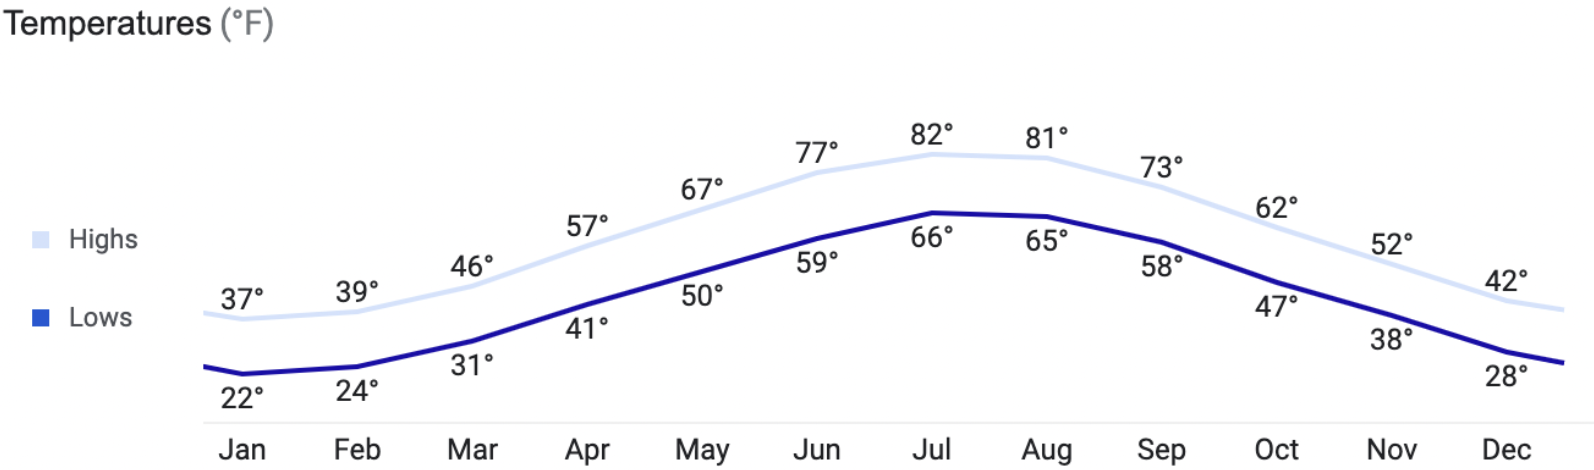 Chart depicting average high and low temperatures in the Boston area throughout the year